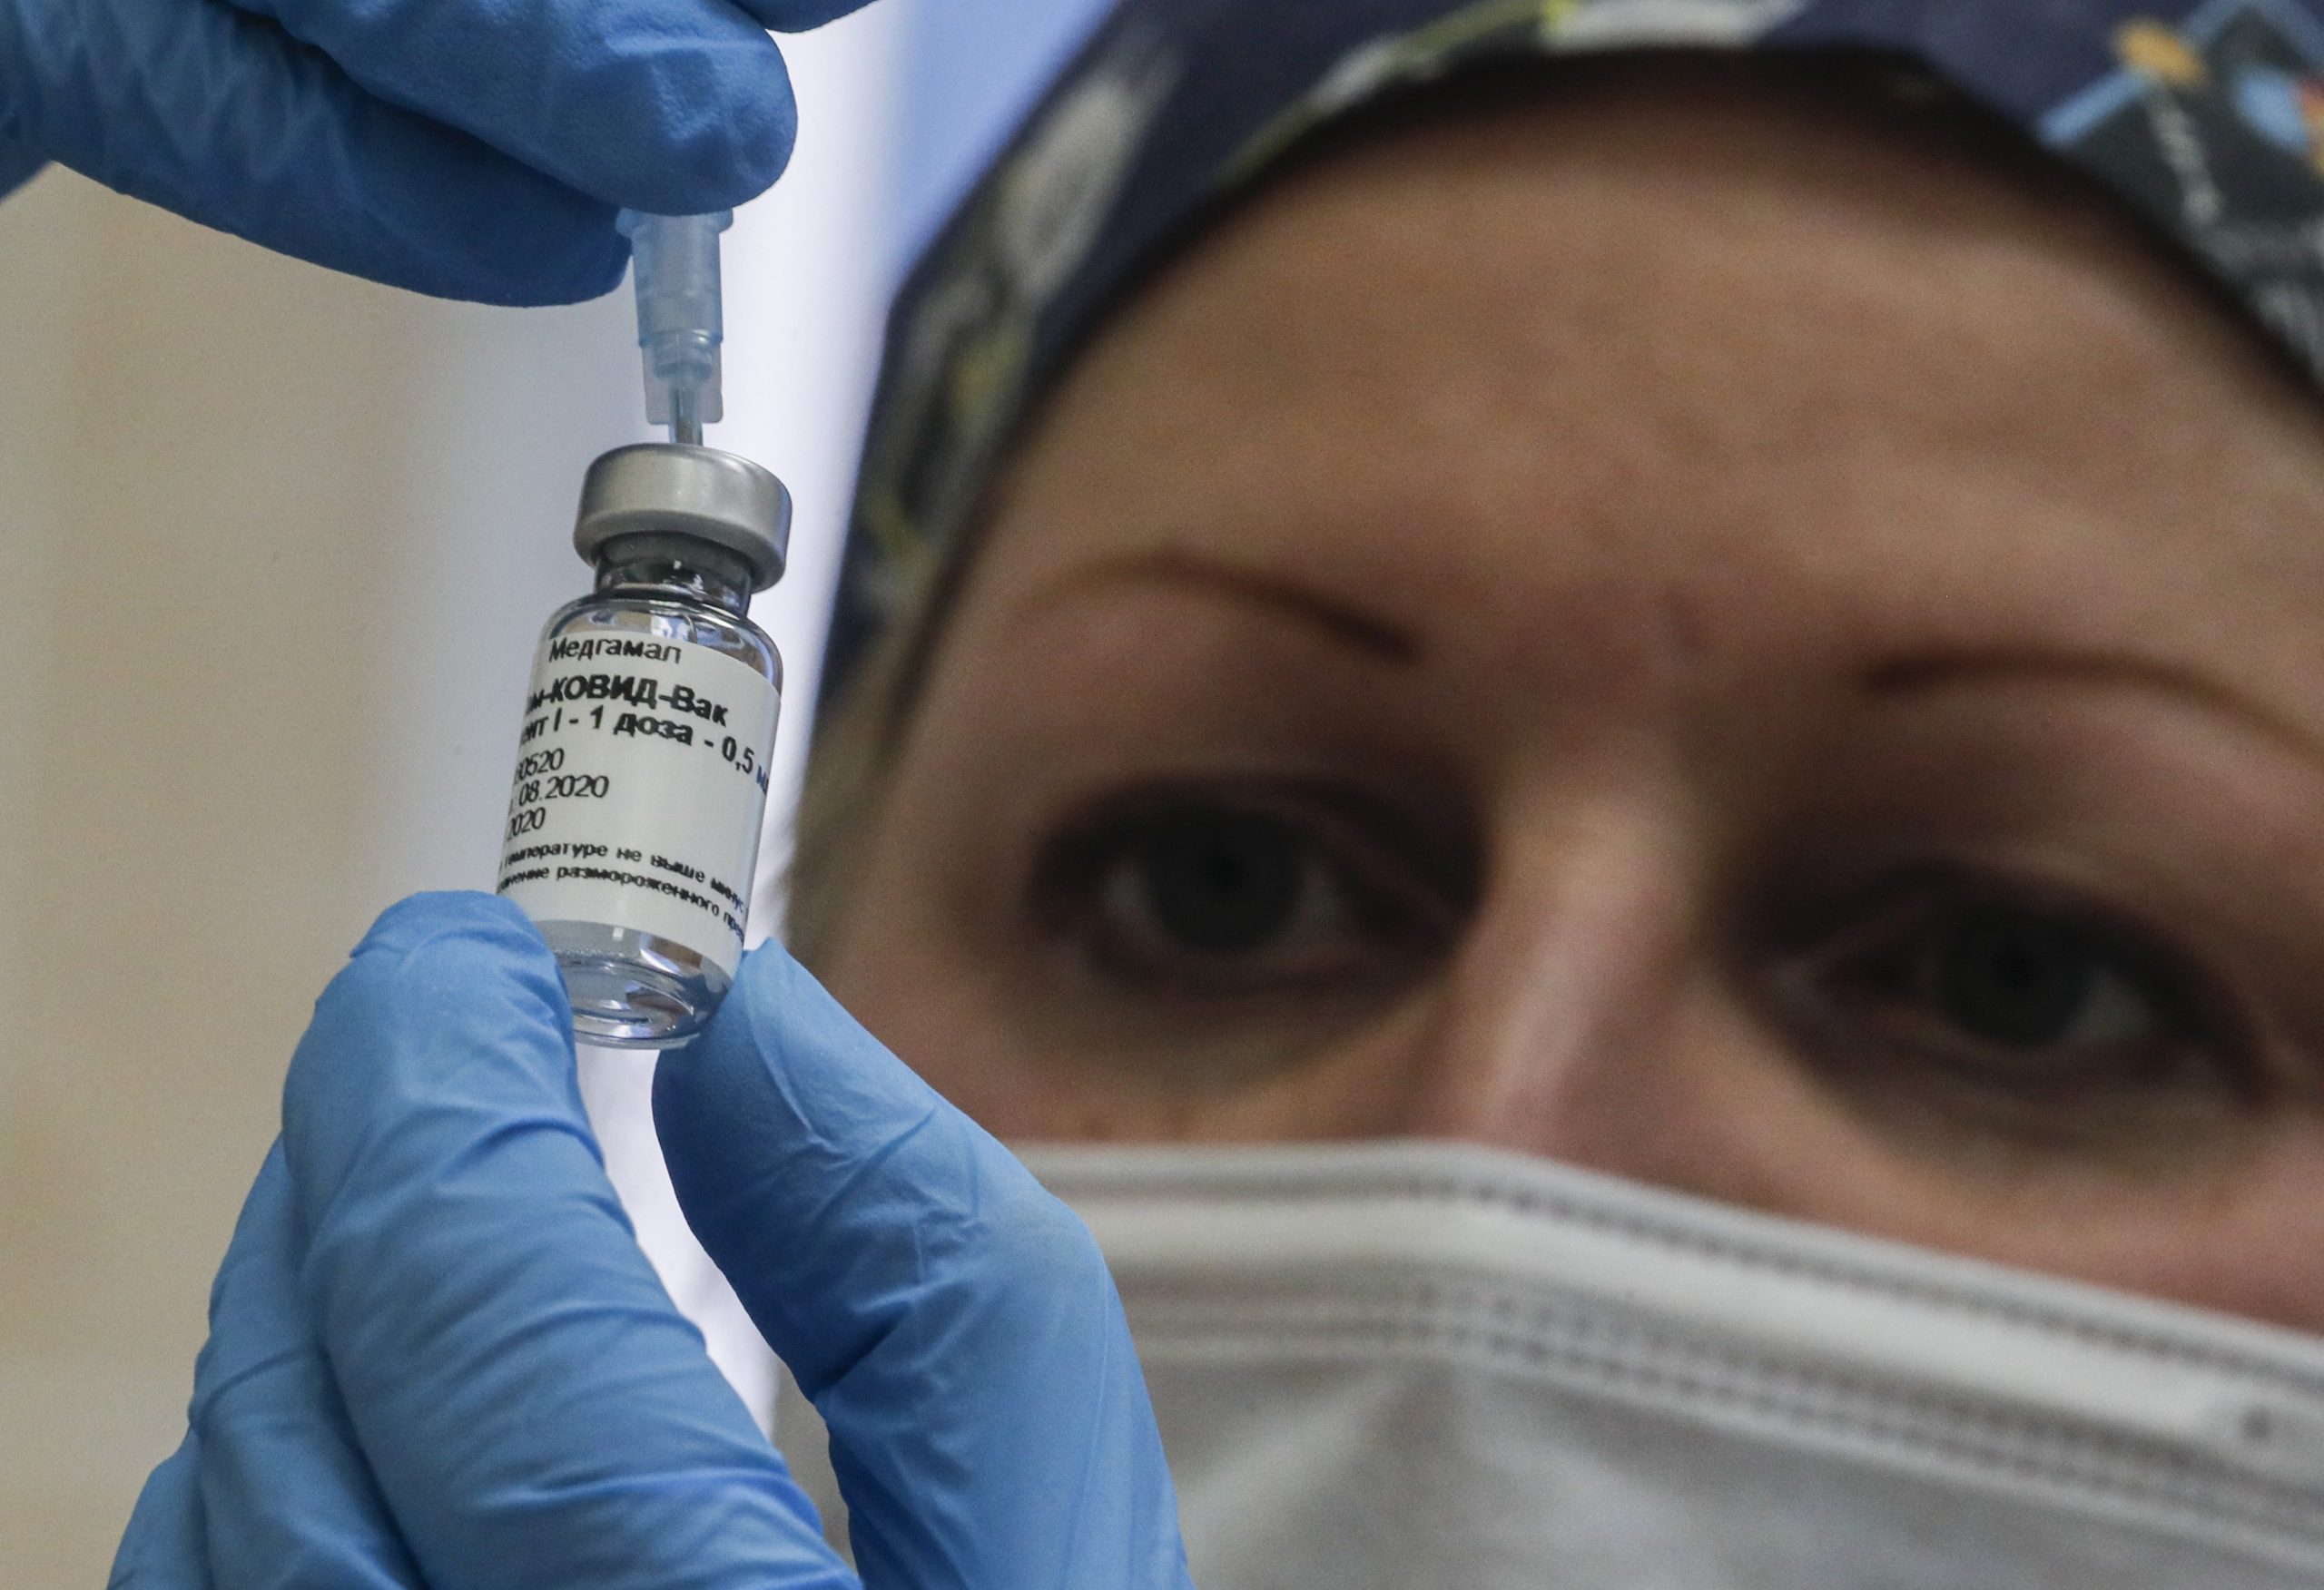 Russia's Sputnik V Vaccine Orbits Hungary After Official Authorization